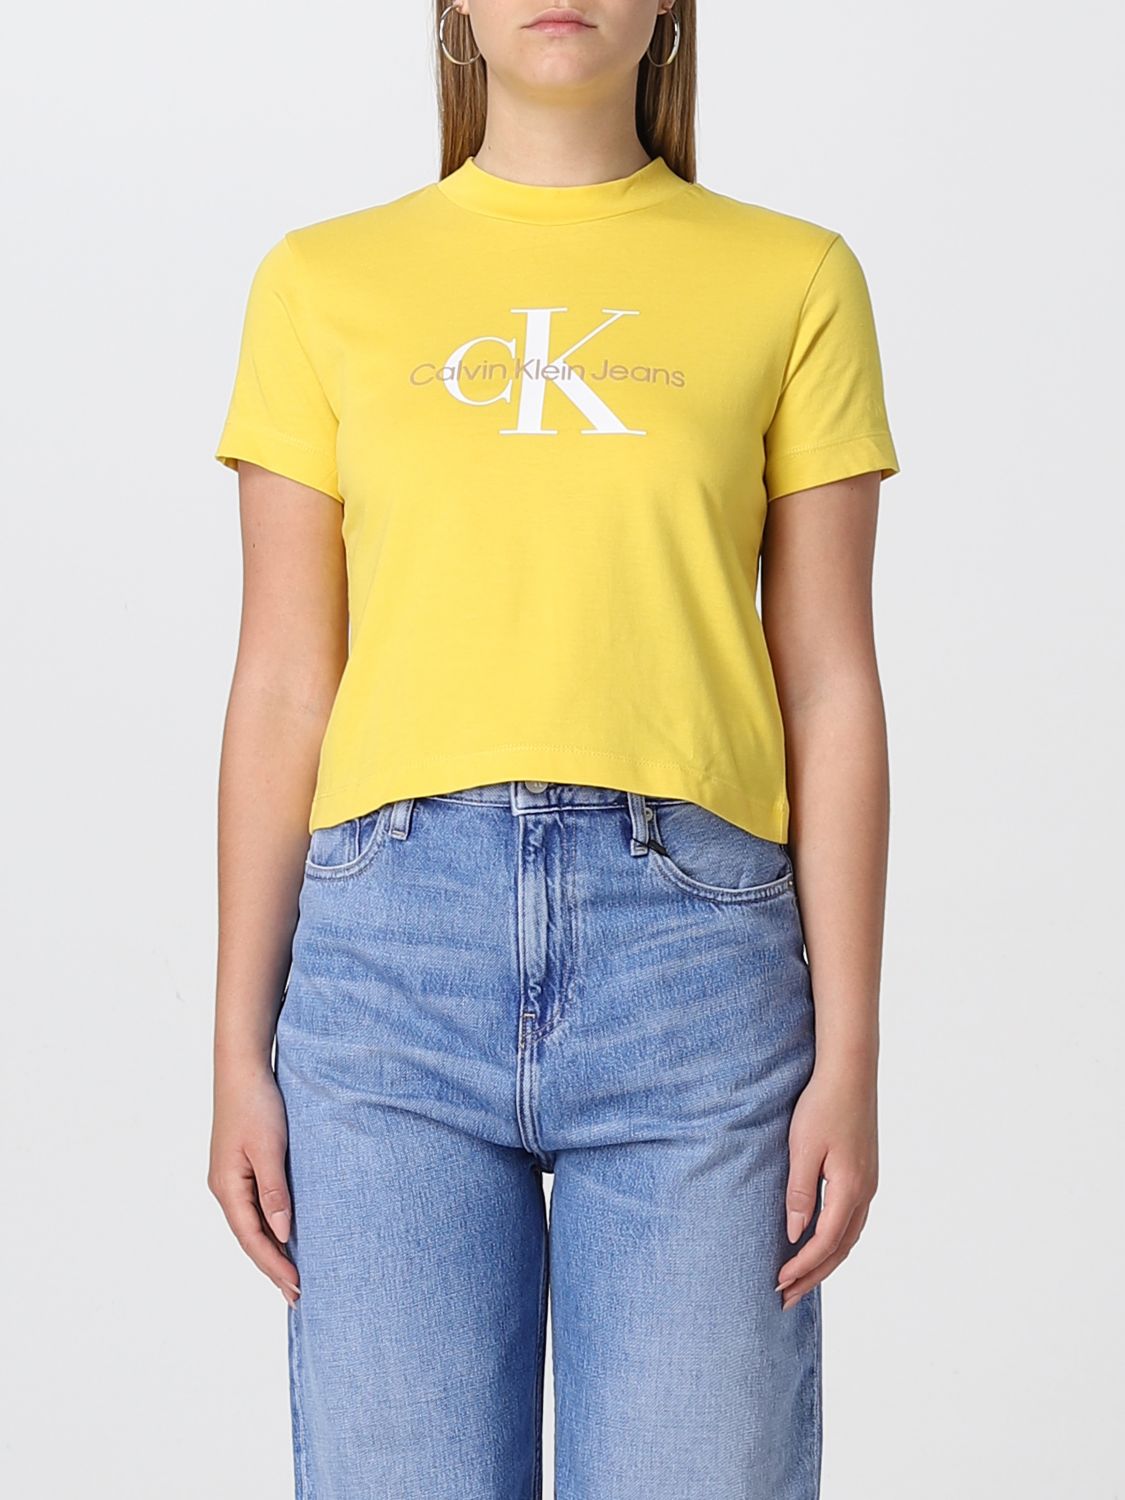 CALVIN KLEIN JEANS: t-shirt for woman - Yellow | Calvin Klein Jeans t-shirt  J20J218852 online on 